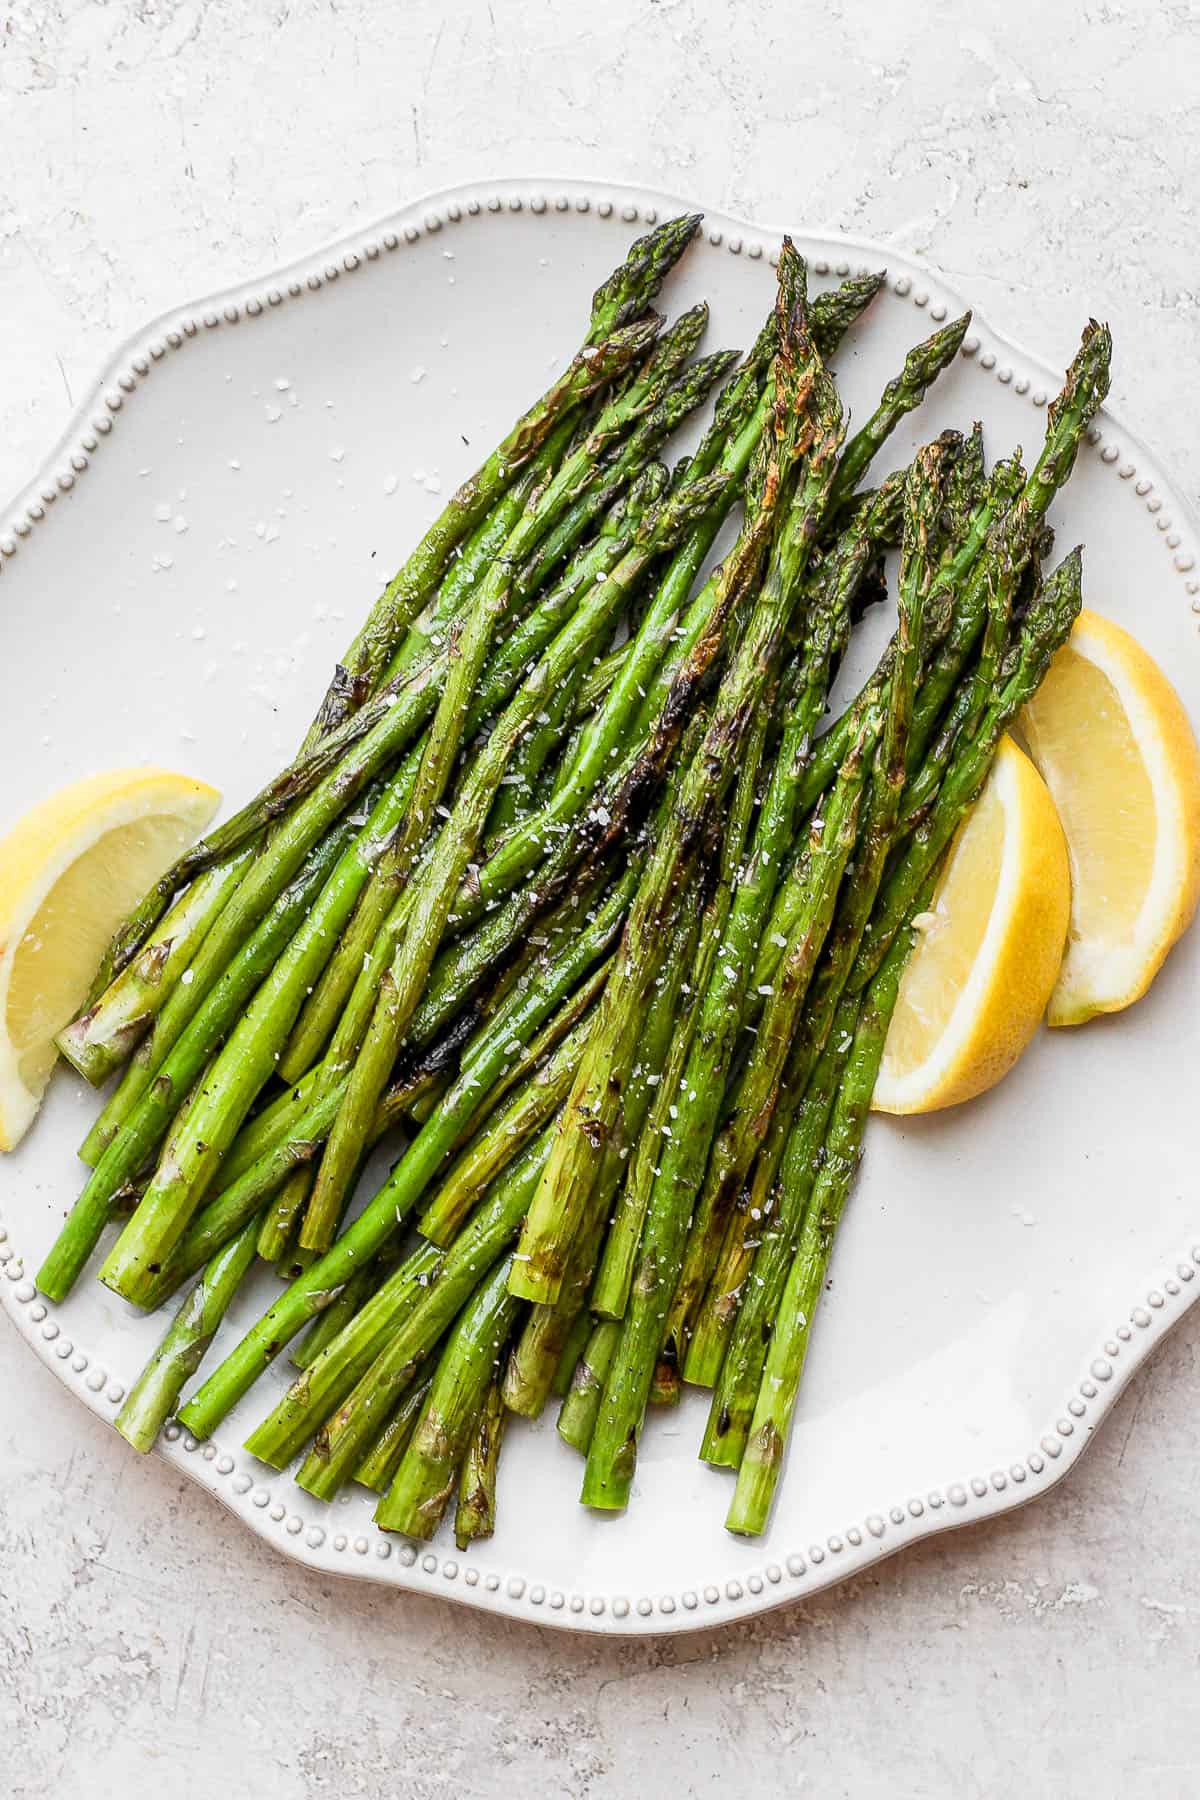 Plate of grilled asparagus with lemon wedges